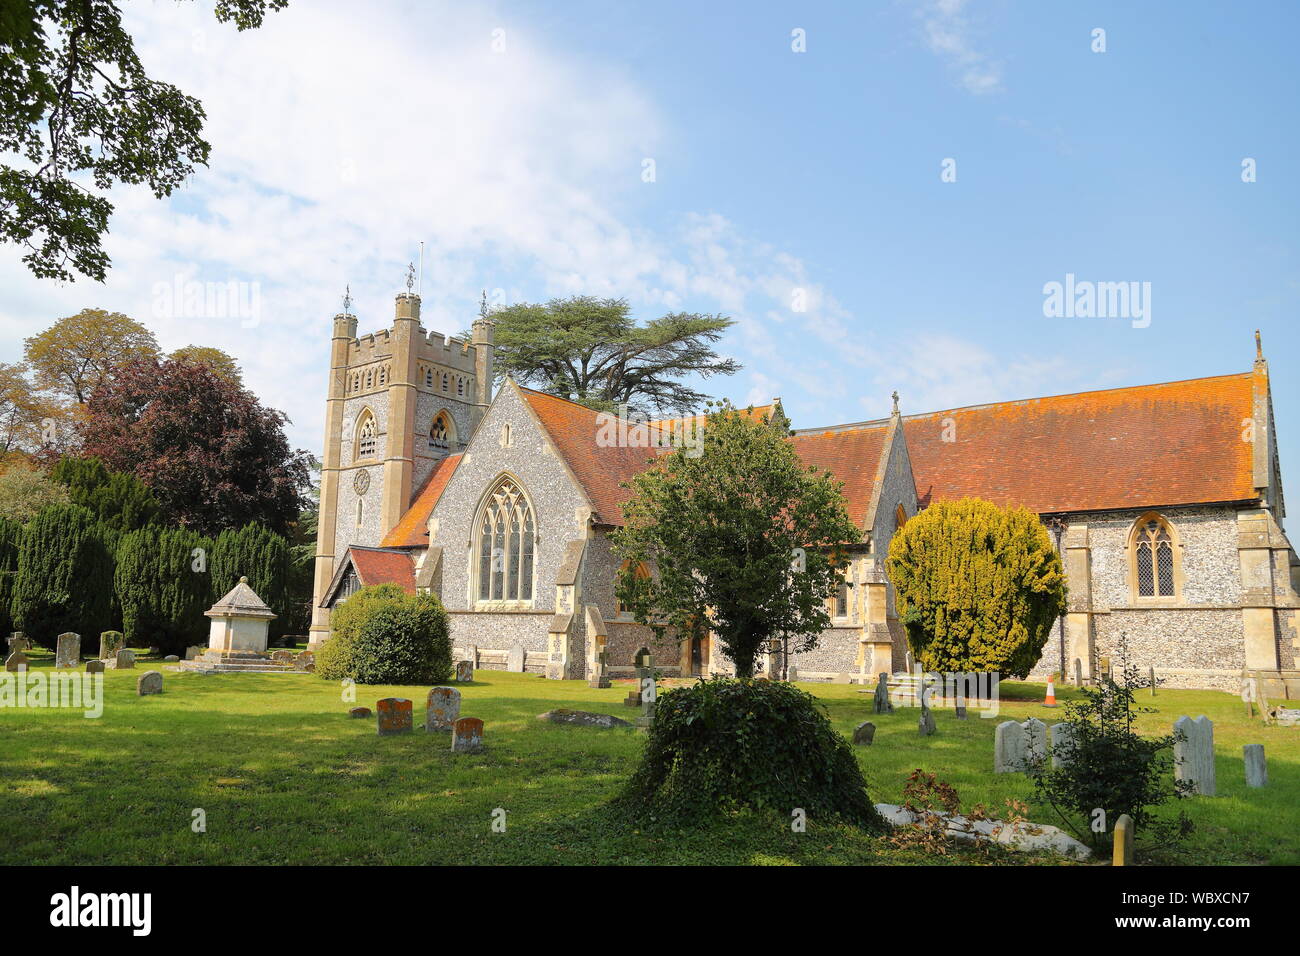 St Mary the Virgin church in Hambleden village, which has been used as a backdrop for several TV series like Midsummer murders in Buckinghamshire, UK Stock Photo